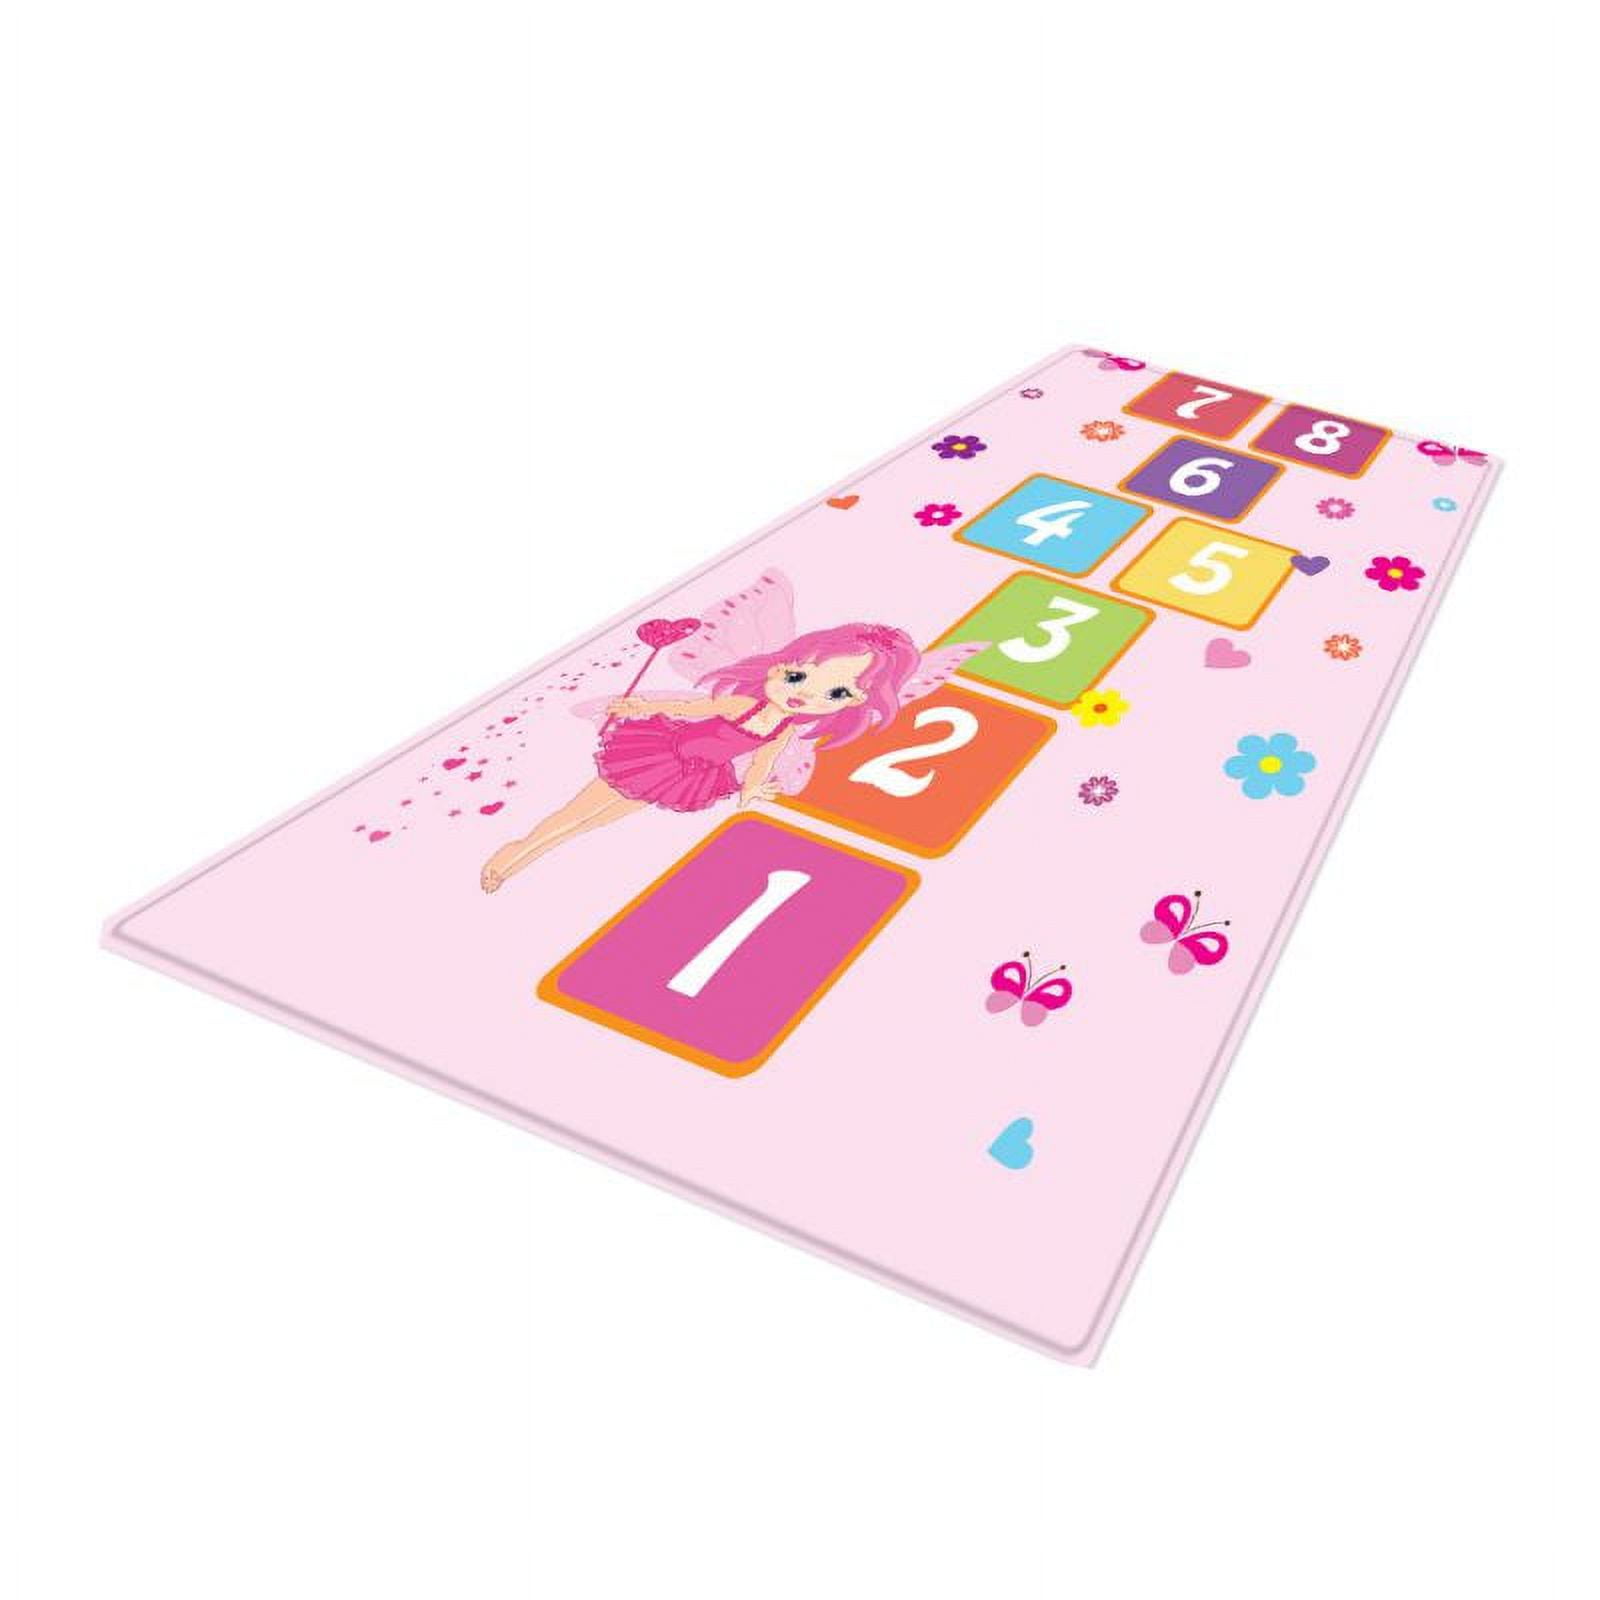 Dropship Kids Hopscotch Floor Rug Mat 63x31in Big Space Kids Play Mats  Non-Slip Silicone Back Mat Wear-Resistant Kid Hopscotch Rugs Suitable For  Children's Rooms Home Bedroom Decor Nursery Playground to Sell Online